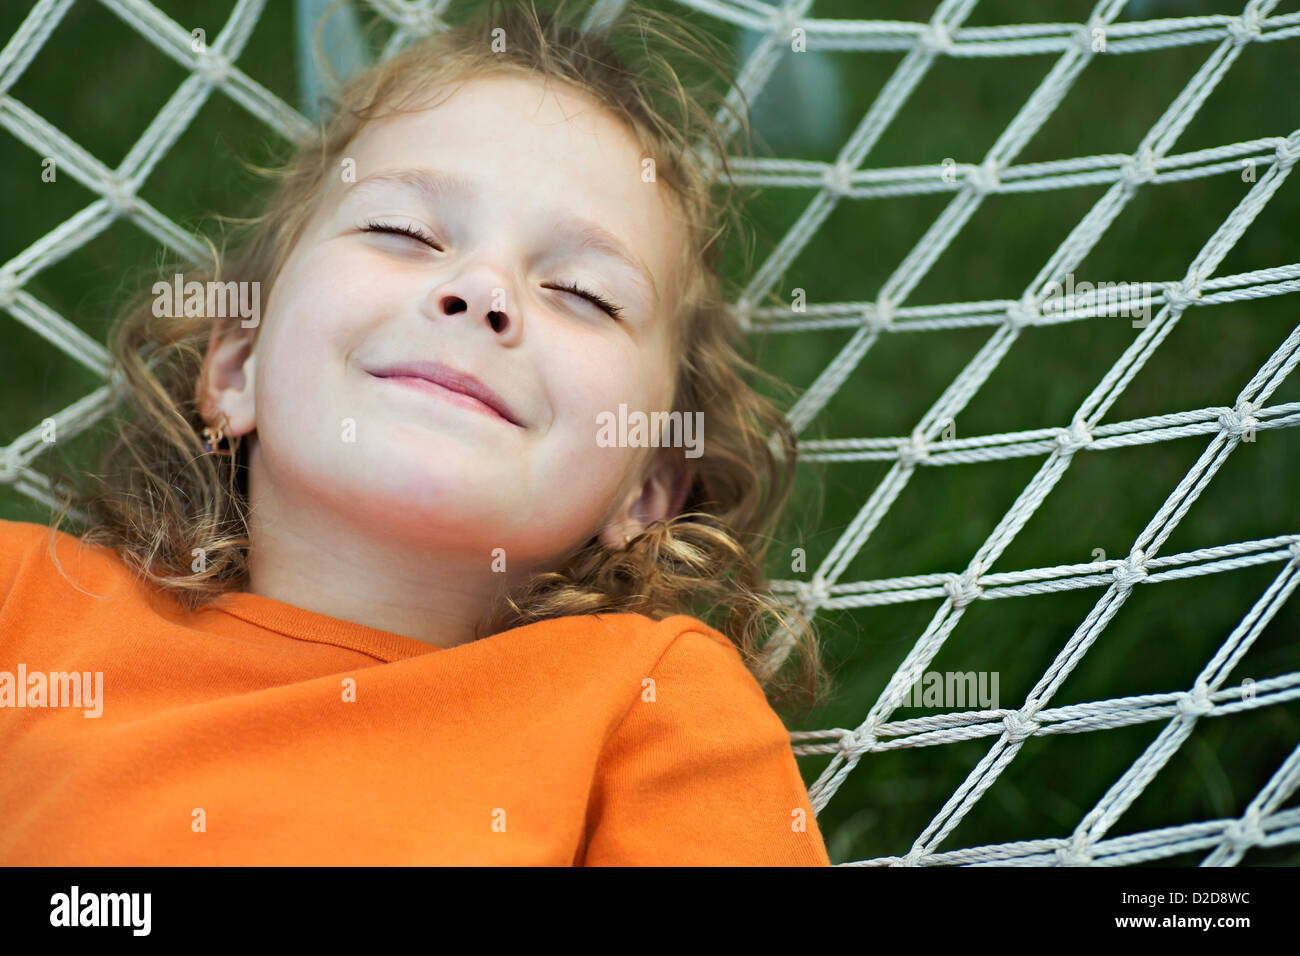 A young smiling girl lying on a hammock with her eyes closed Stock Photo